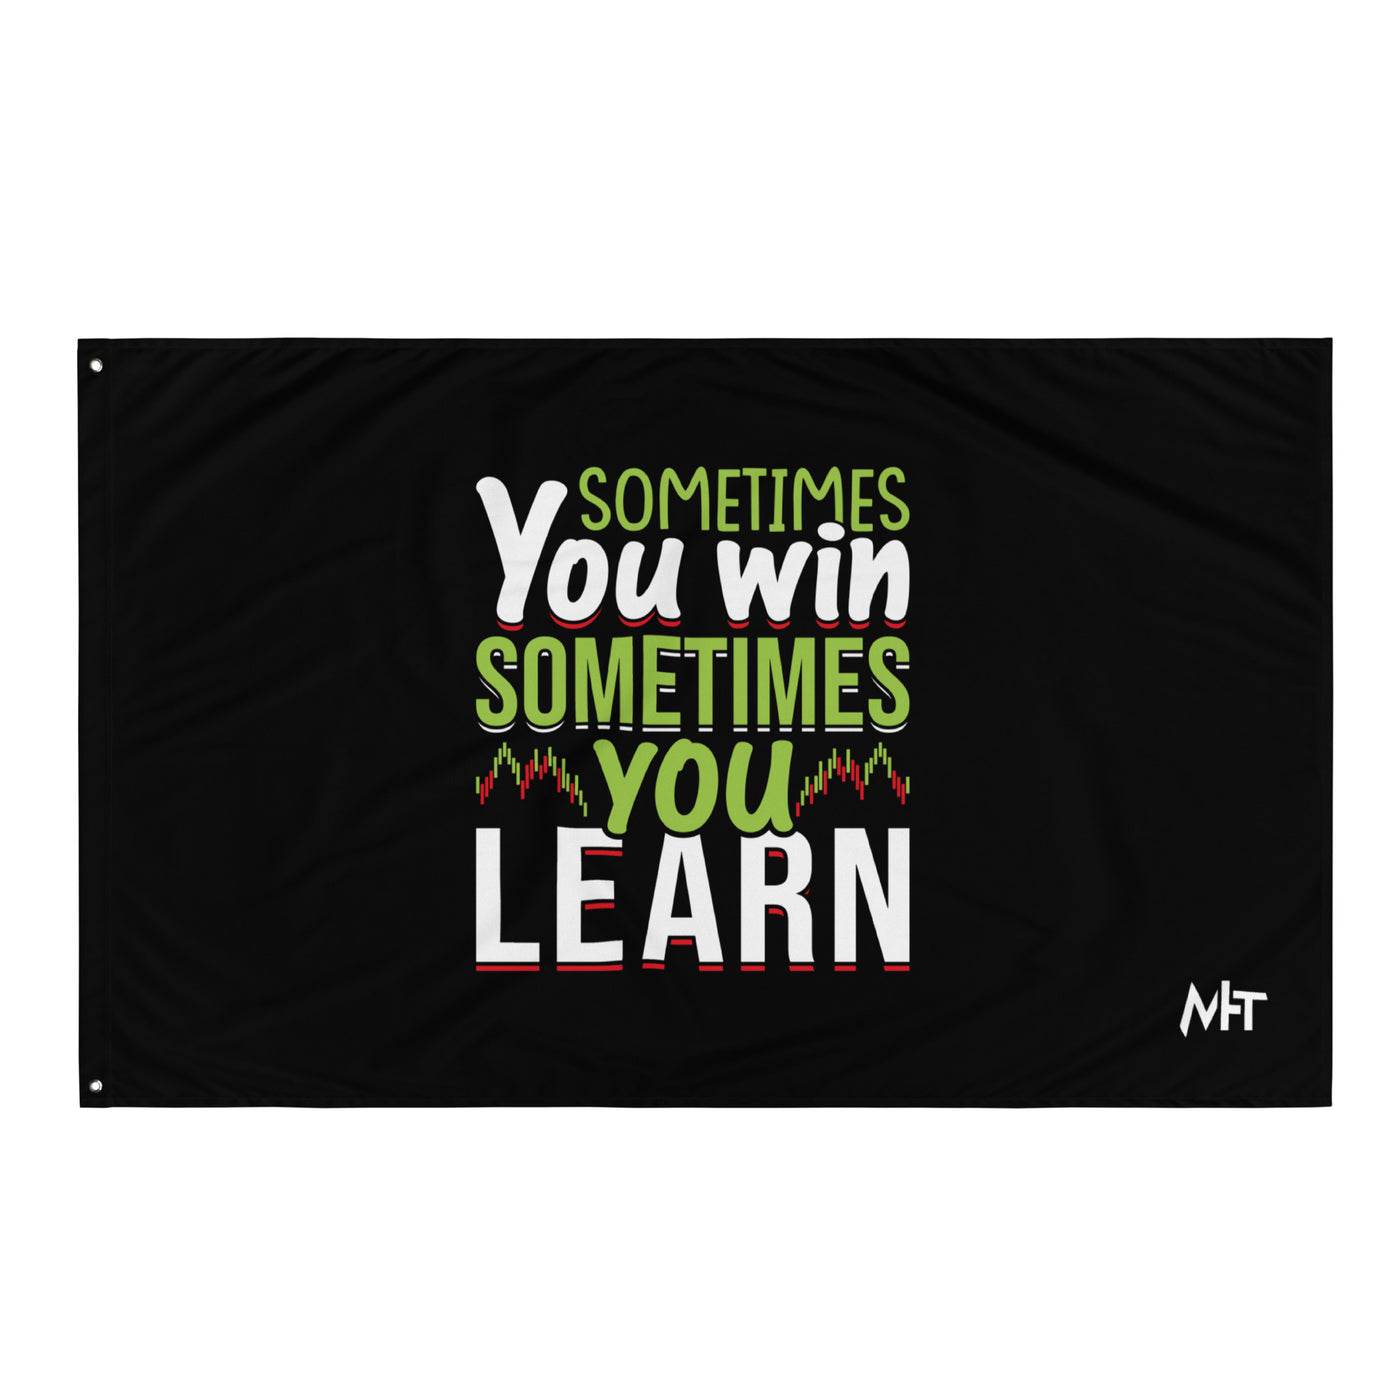 Sometimes you Win, sometimes you Learn - Flag